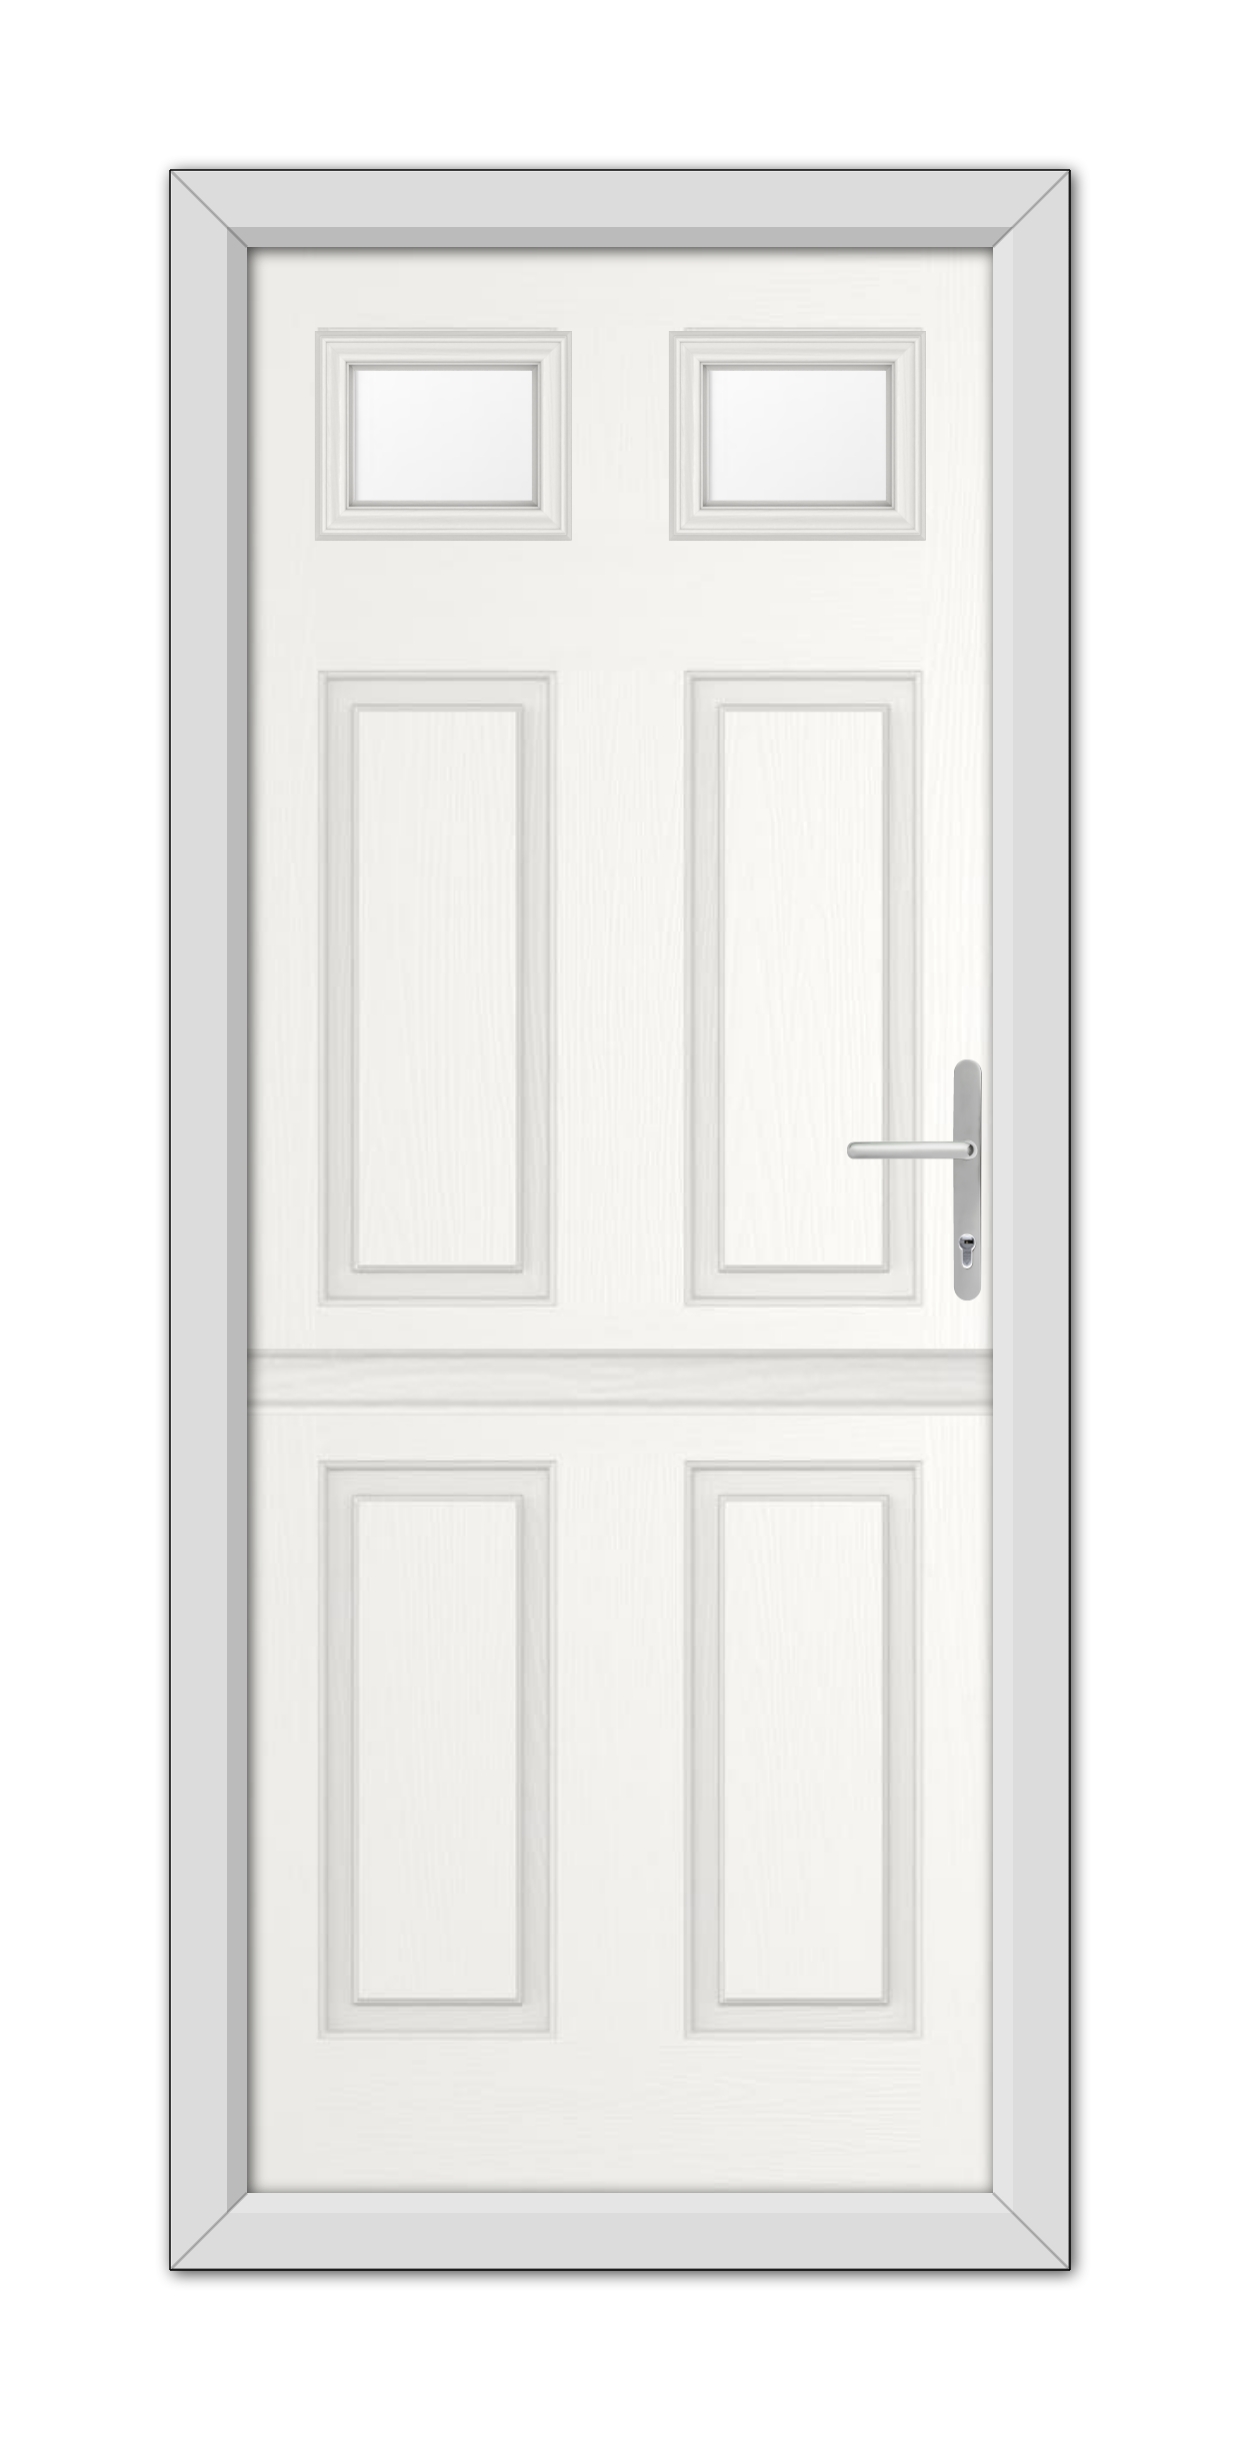 A White Middleton Glazed 2 Stable Composite Door with six squares and a modern handle, set in a simple frame, viewed frontally on a neutral background.